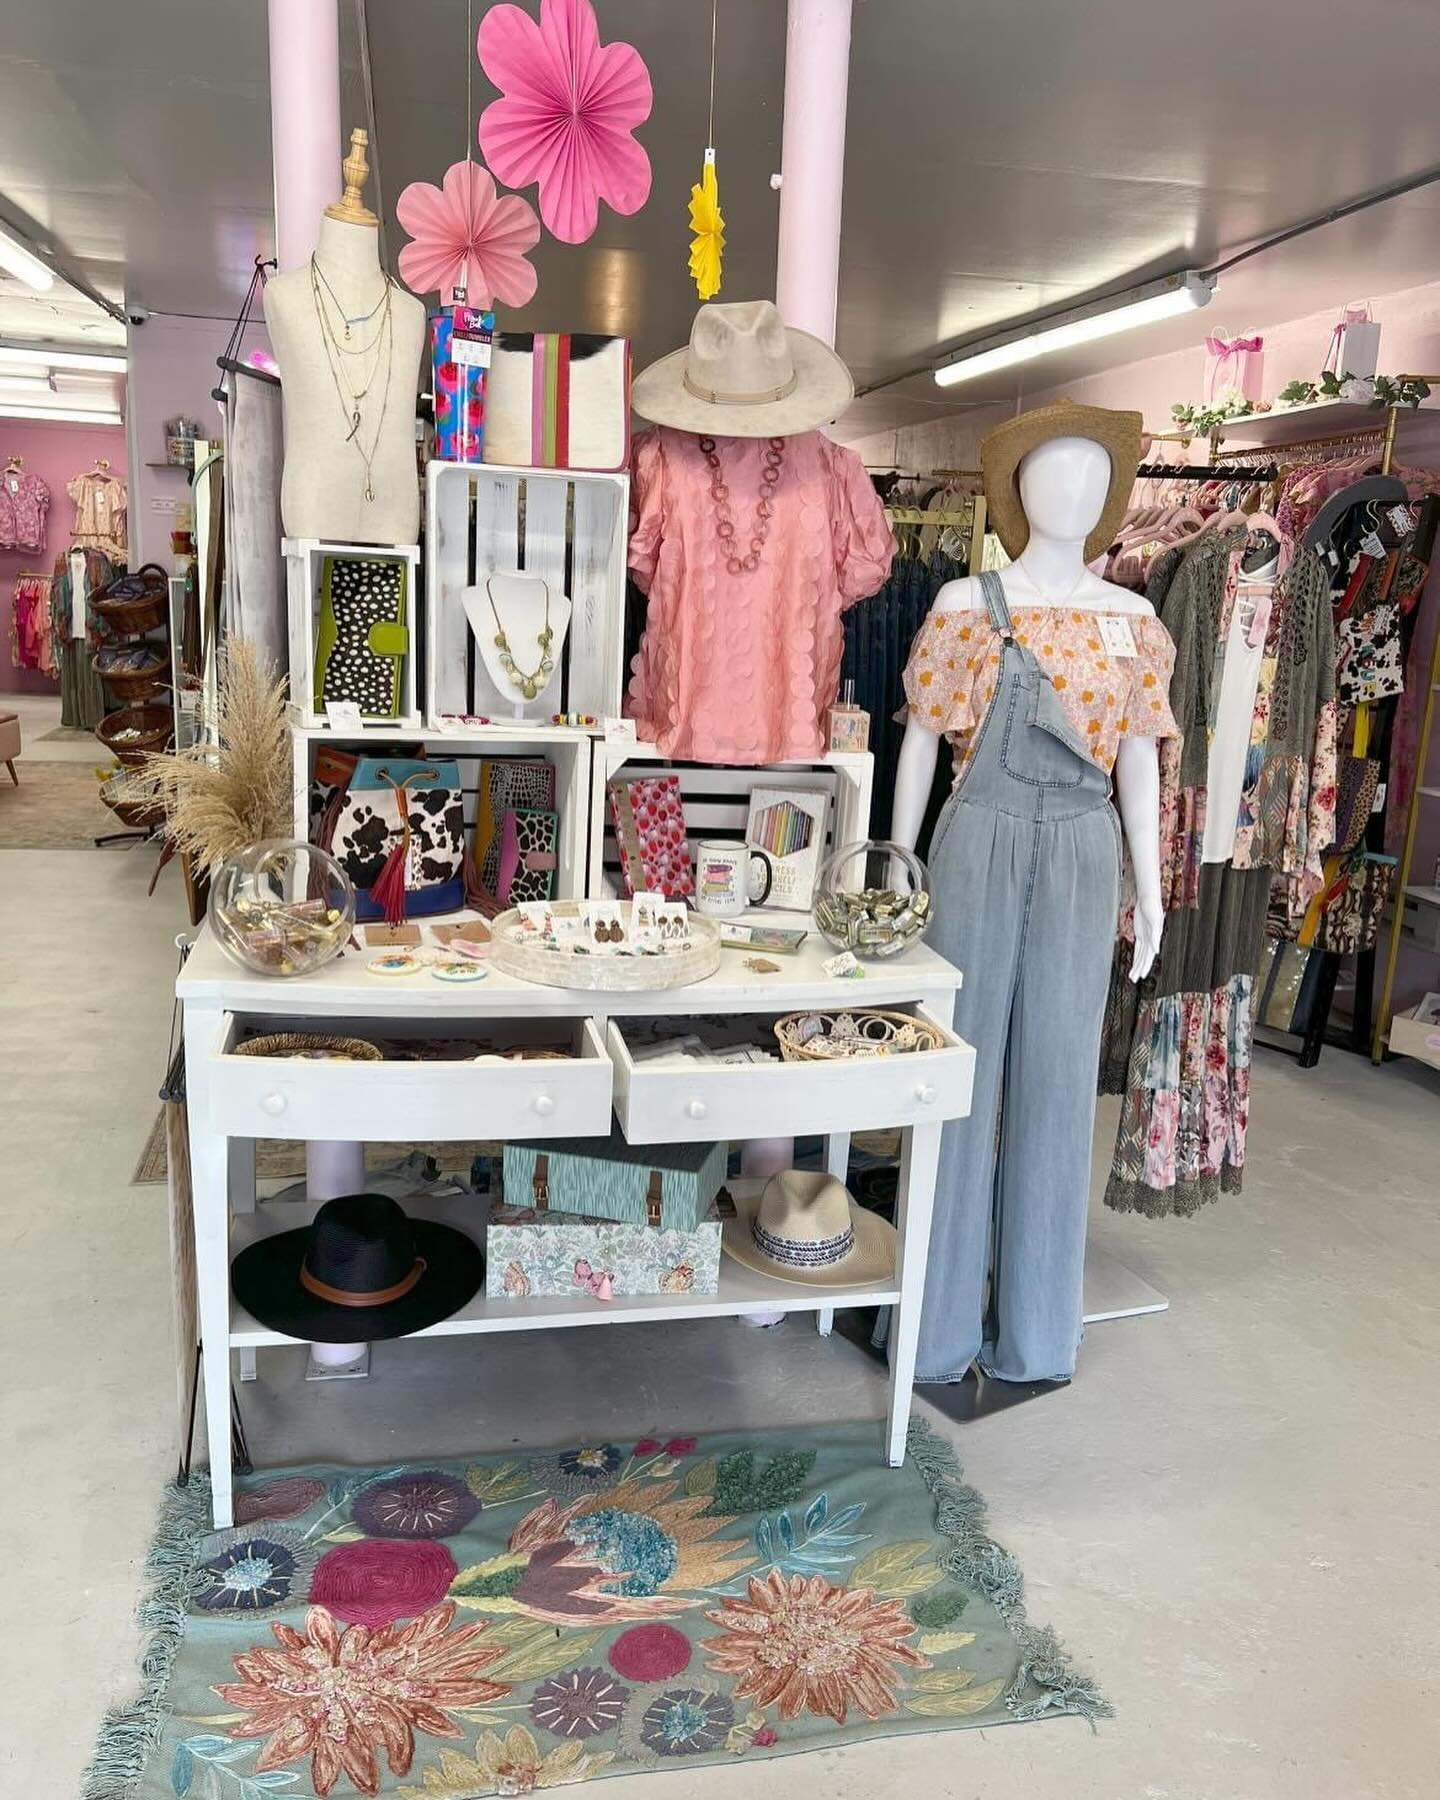 You can shop our gift and clothing boutique at 561 Mill Street in downtown Sylva Tuesday-Thursday 10-6, Fri &amp; Sat 10-7 &amp; Sunday 12-6! 

We are adding lots of new items this week! Look for the pink store! 🛍️💕